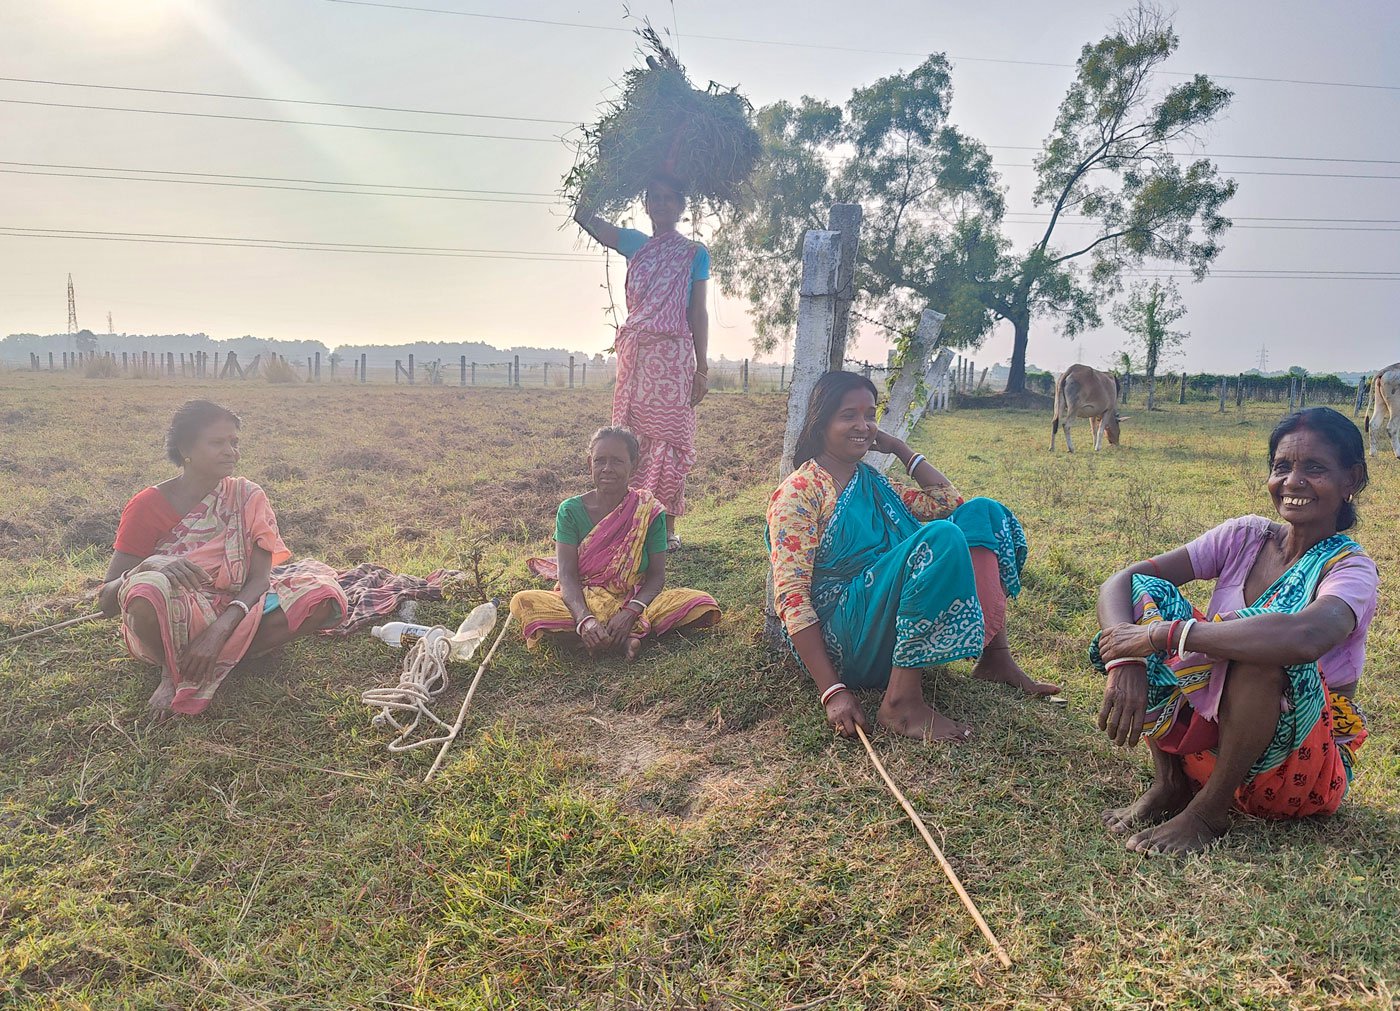 Lohar women resting and chatting while grazing cattle in Birbhum district of West Bengal